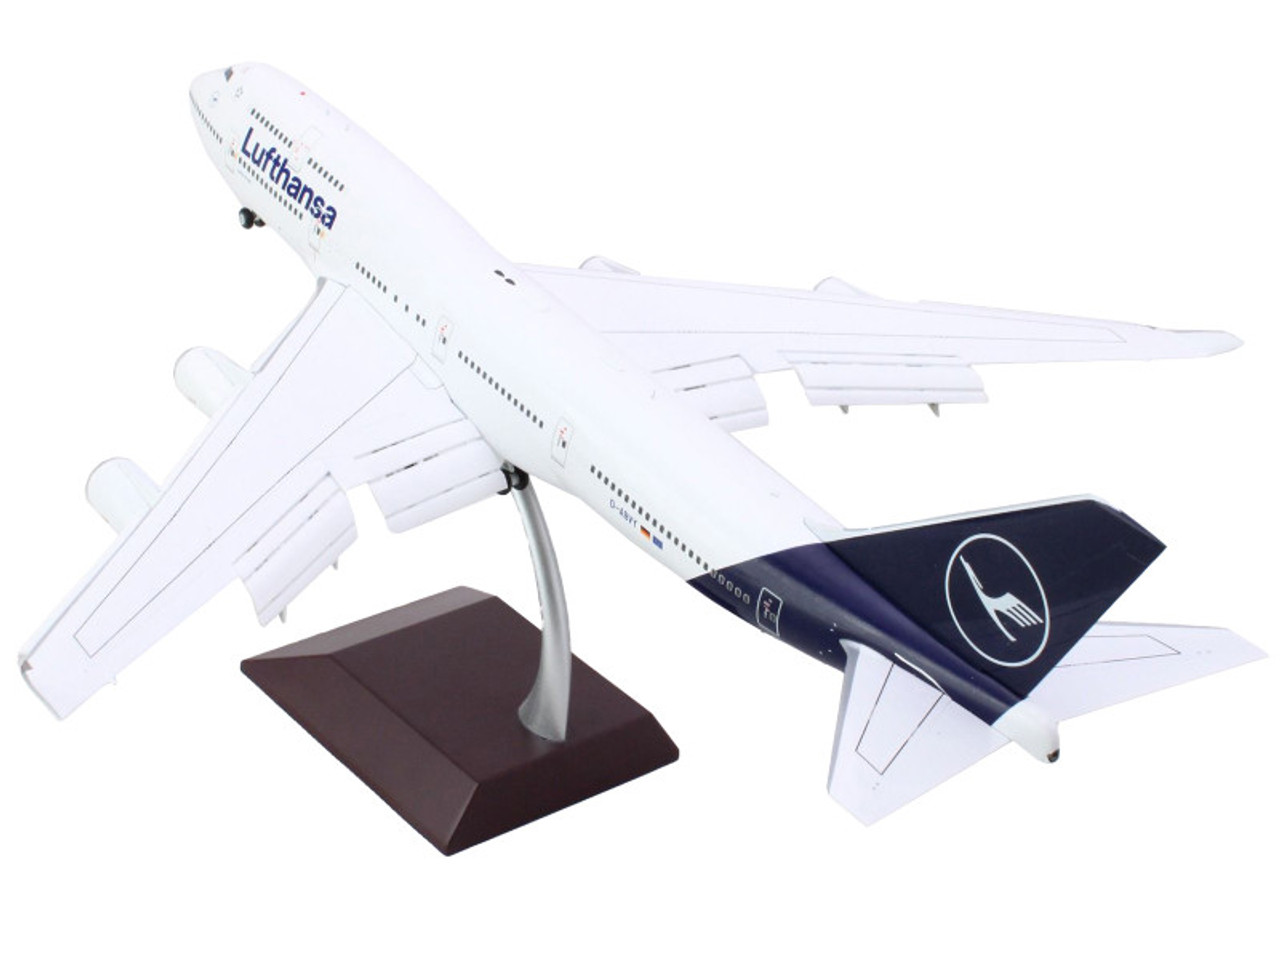 Boeing 747-400 Commercial Aircraft with Flaps Down "Lufthansa" (D-ABVY) White with Dark Blue Tail "Gemini 200" Series 1/200 Diecast Model Airplane by GeminiJets